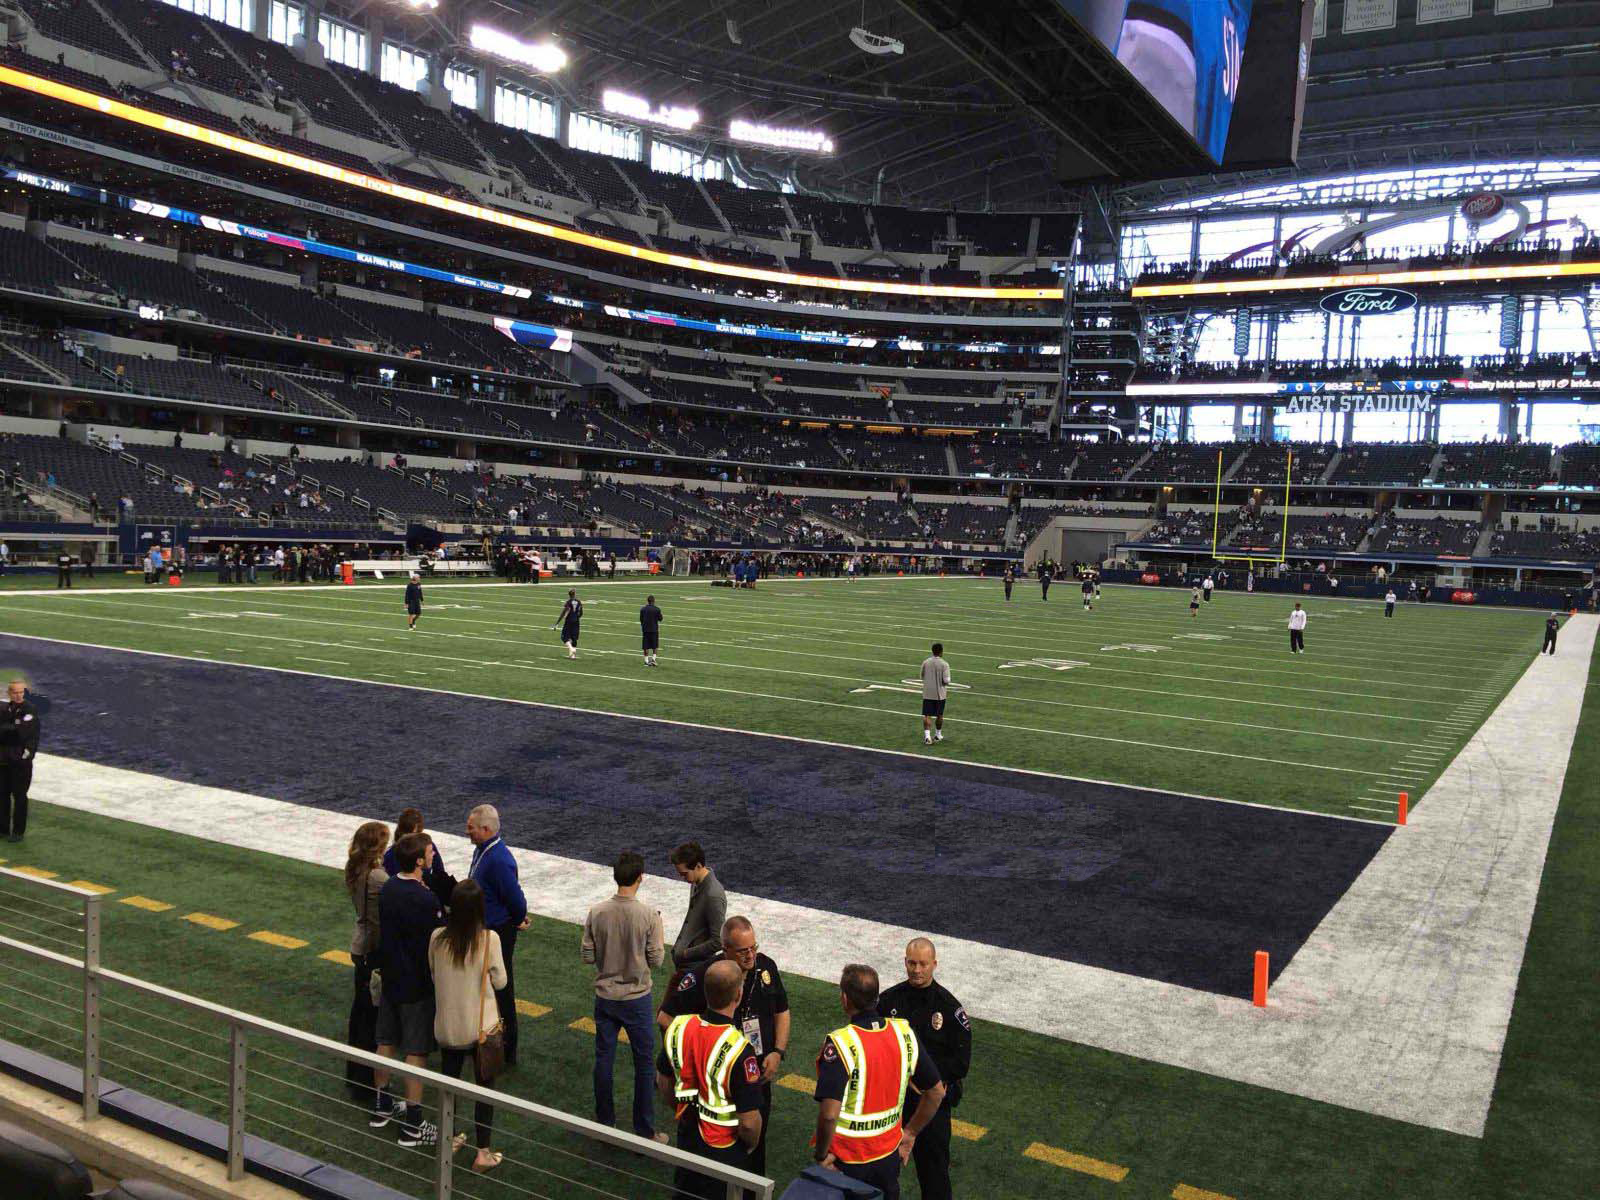 section 120, row 8 seat view  for football - at&t stadium (cowboys stadium)